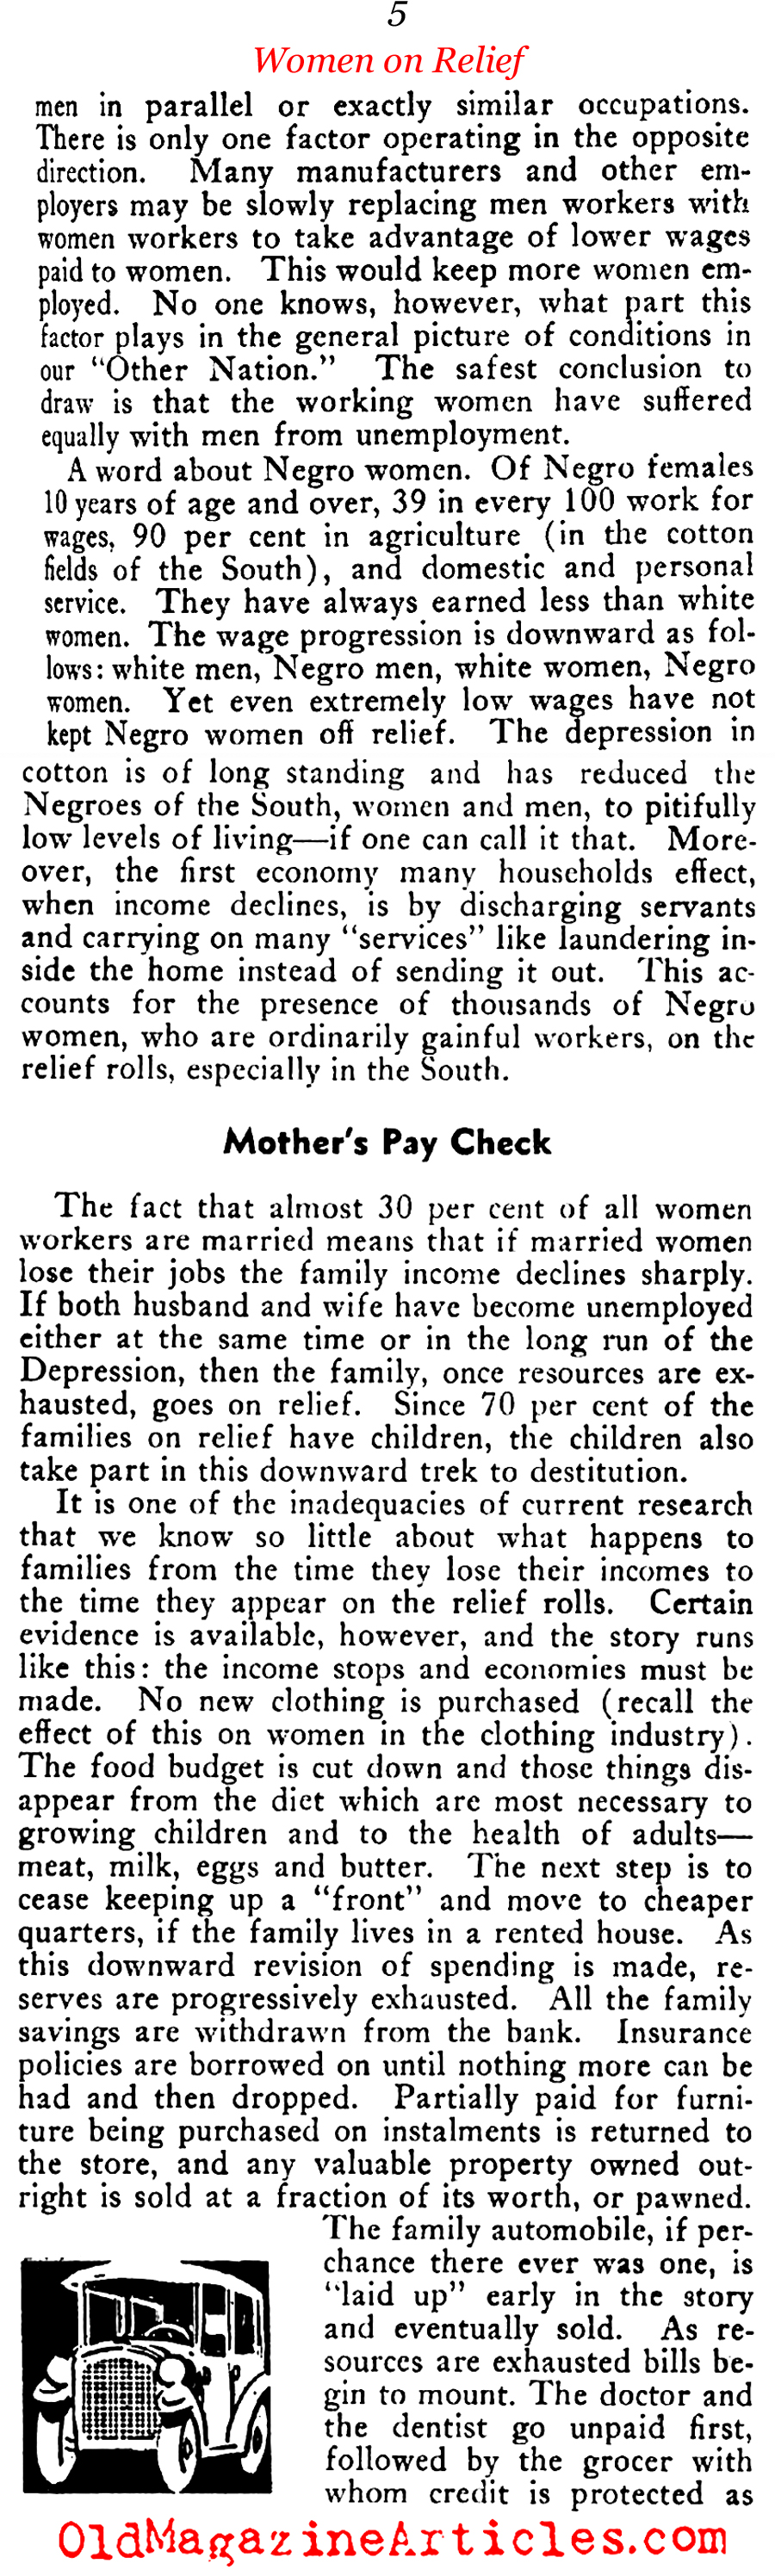 Women on the Relief Rolls (New Outlook Magazine, 1935)